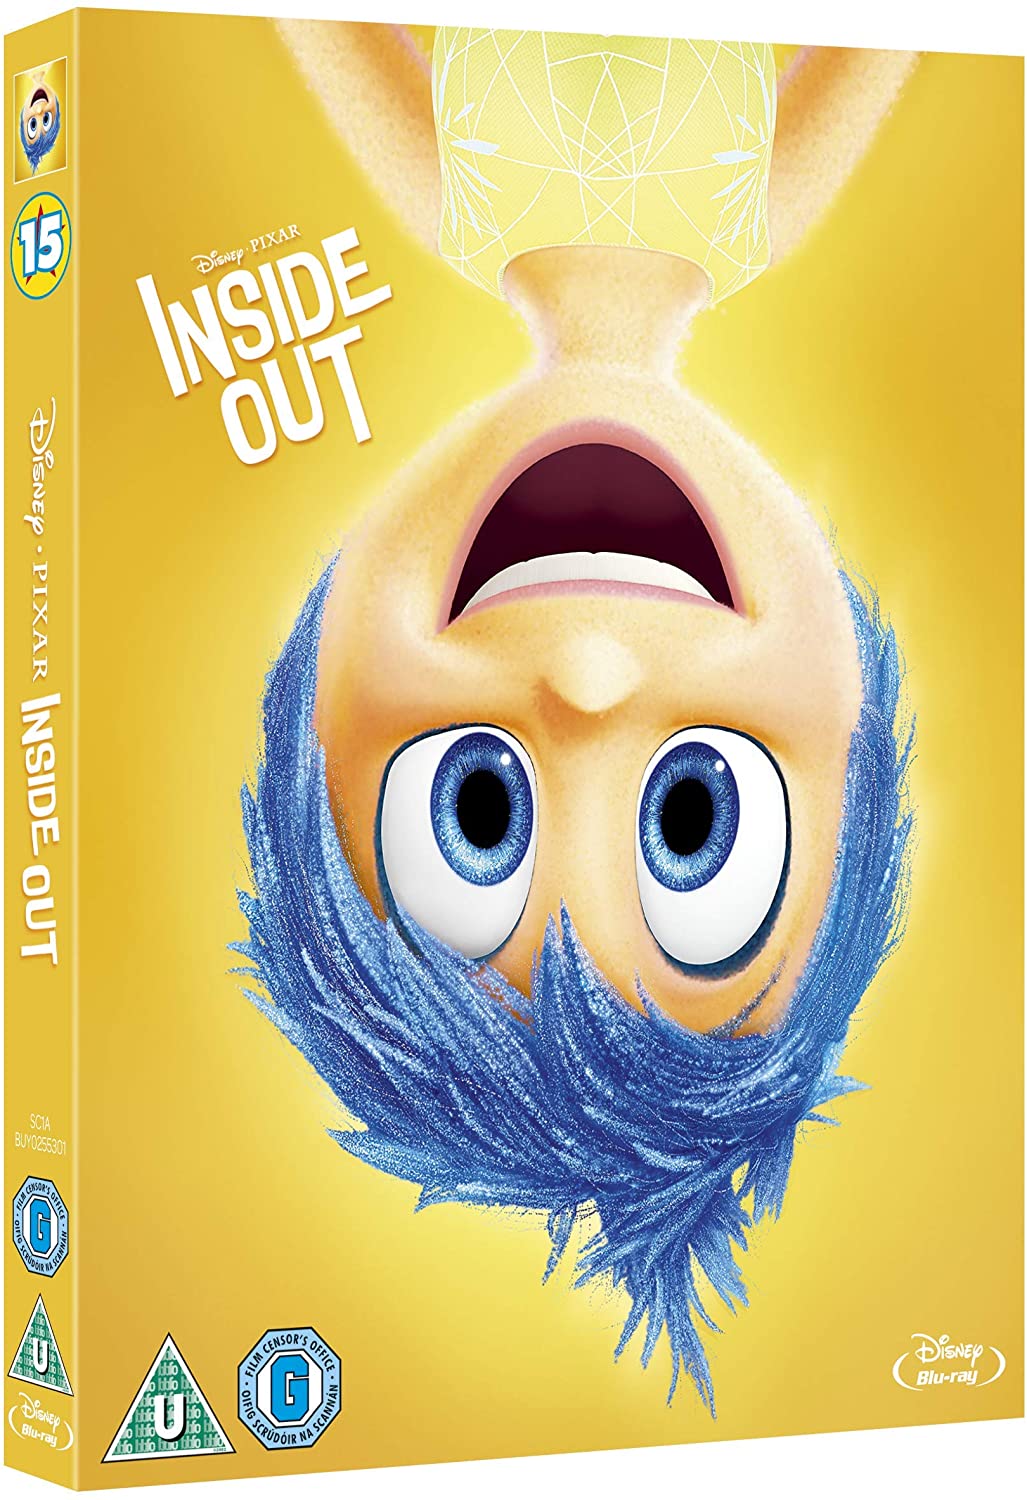 Inside Out [Blu-ray] [2017]